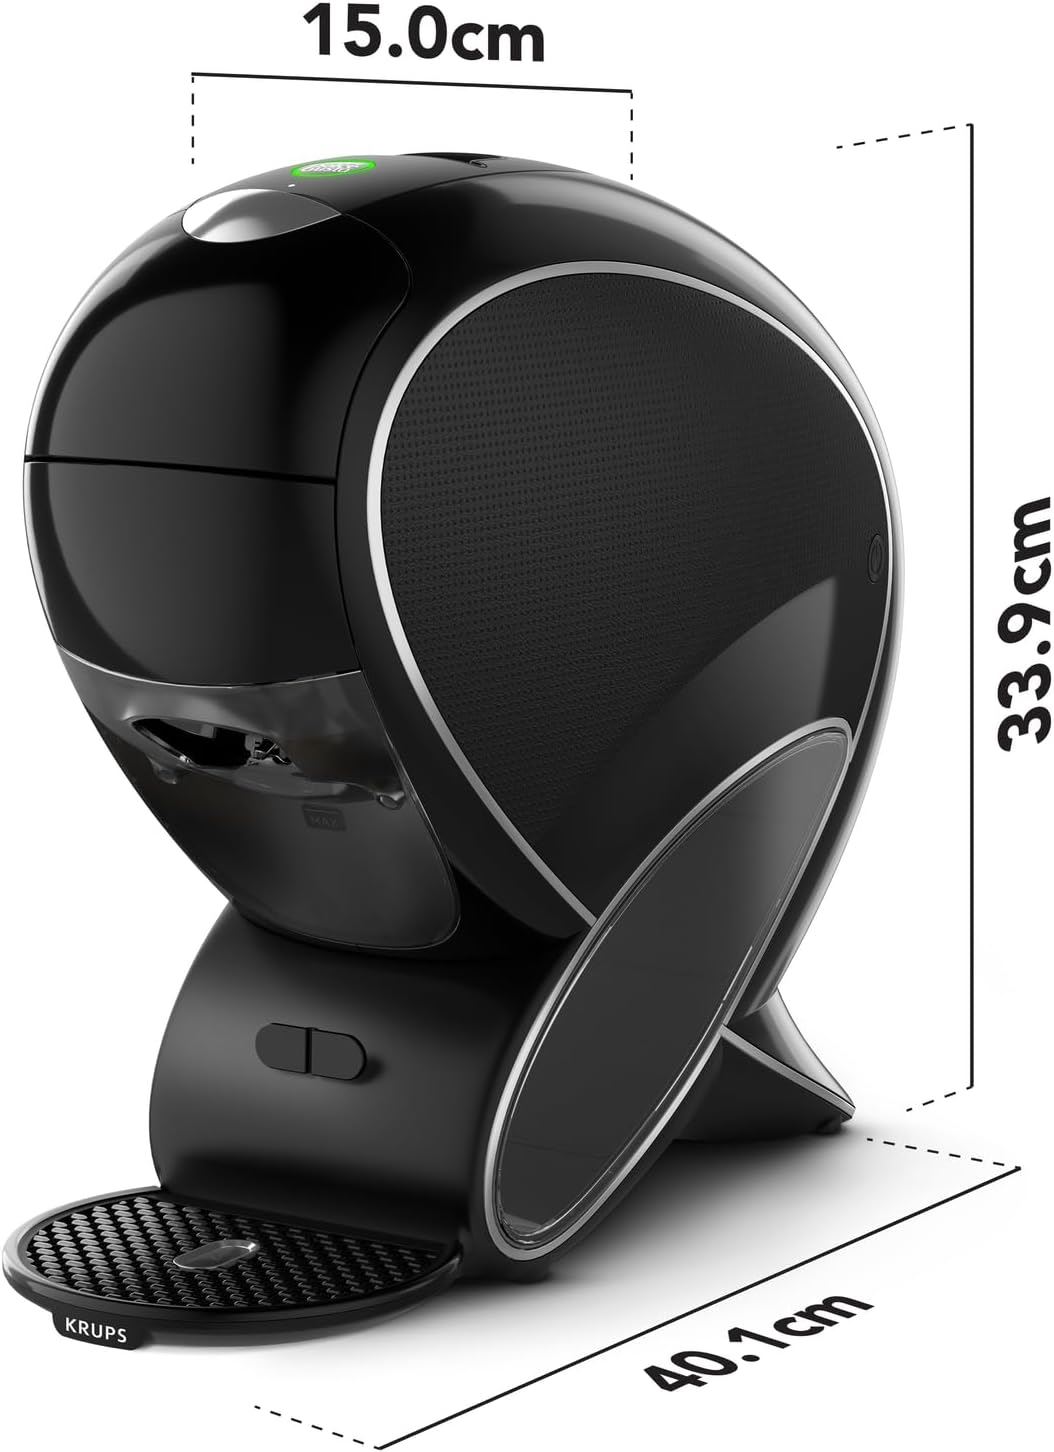 Dimensions Dolce Gusto Neo